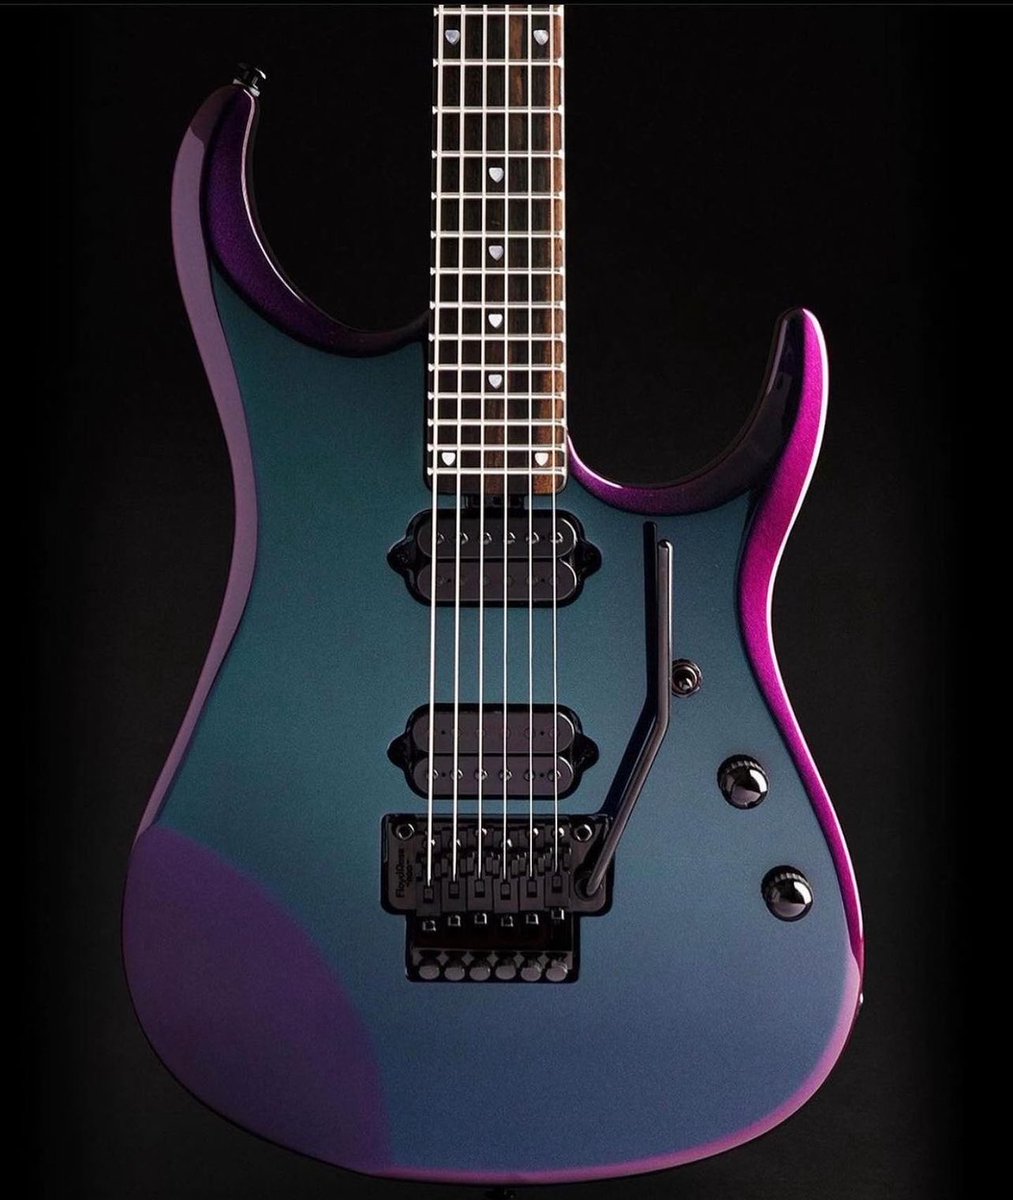 Check out this Mystic Dream JP16 Music Man @music_man guitar with Floyd Rose 1000 Pro Floating tremolo system! #floydrose #floydrosetremolo